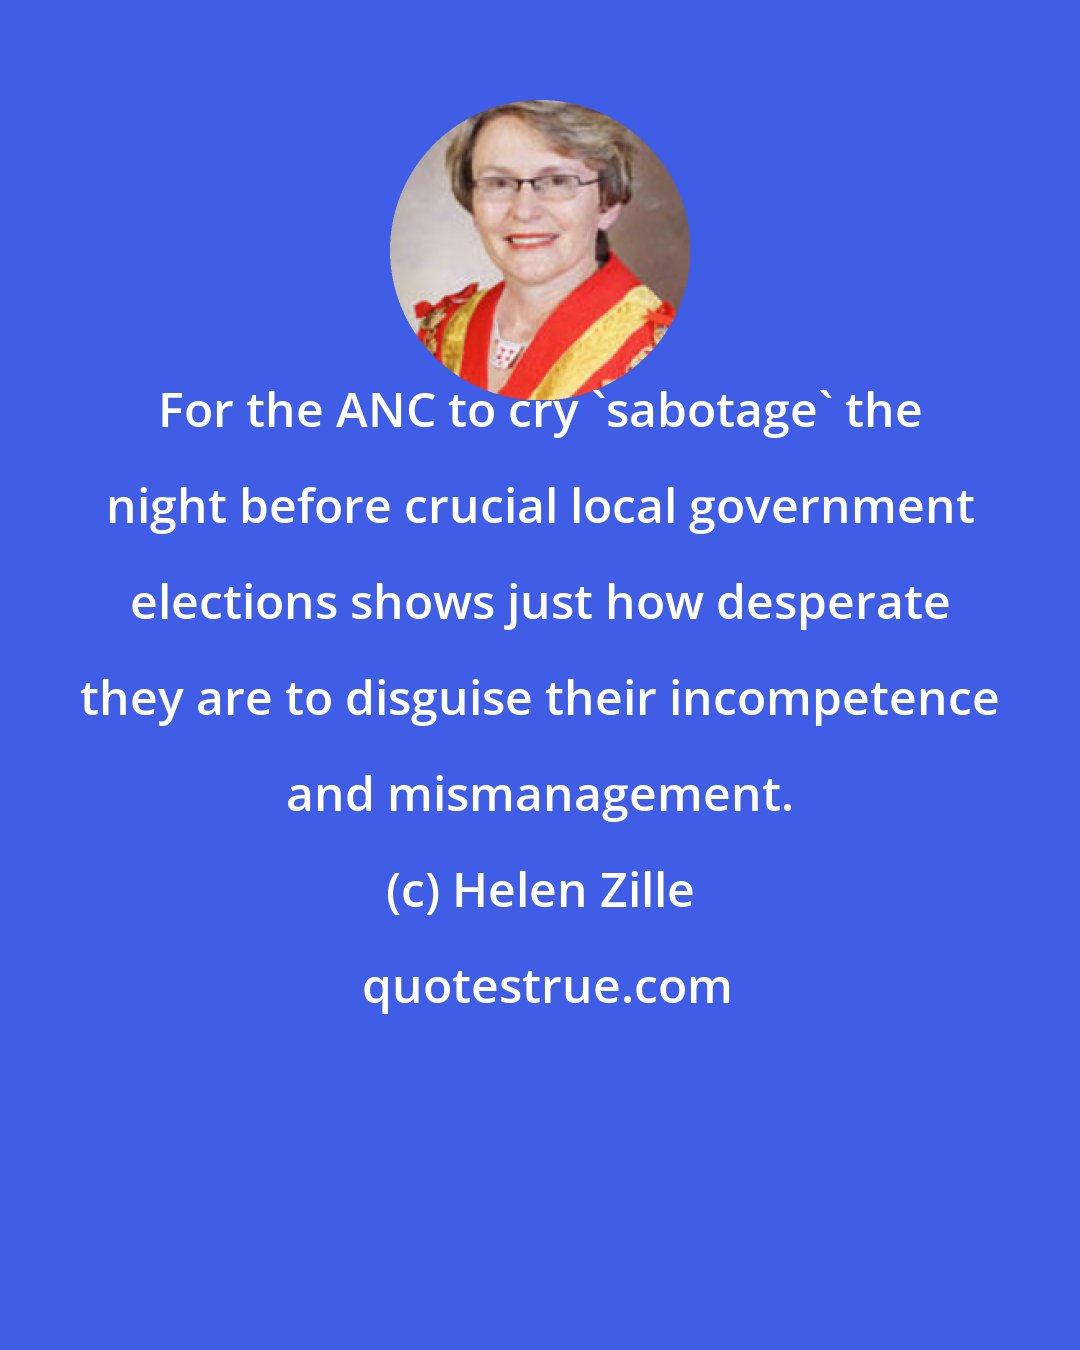 Helen Zille: For the ANC to cry 'sabotage' the night before crucial local government elections shows just how desperate they are to disguise their incompetence and mismanagement.